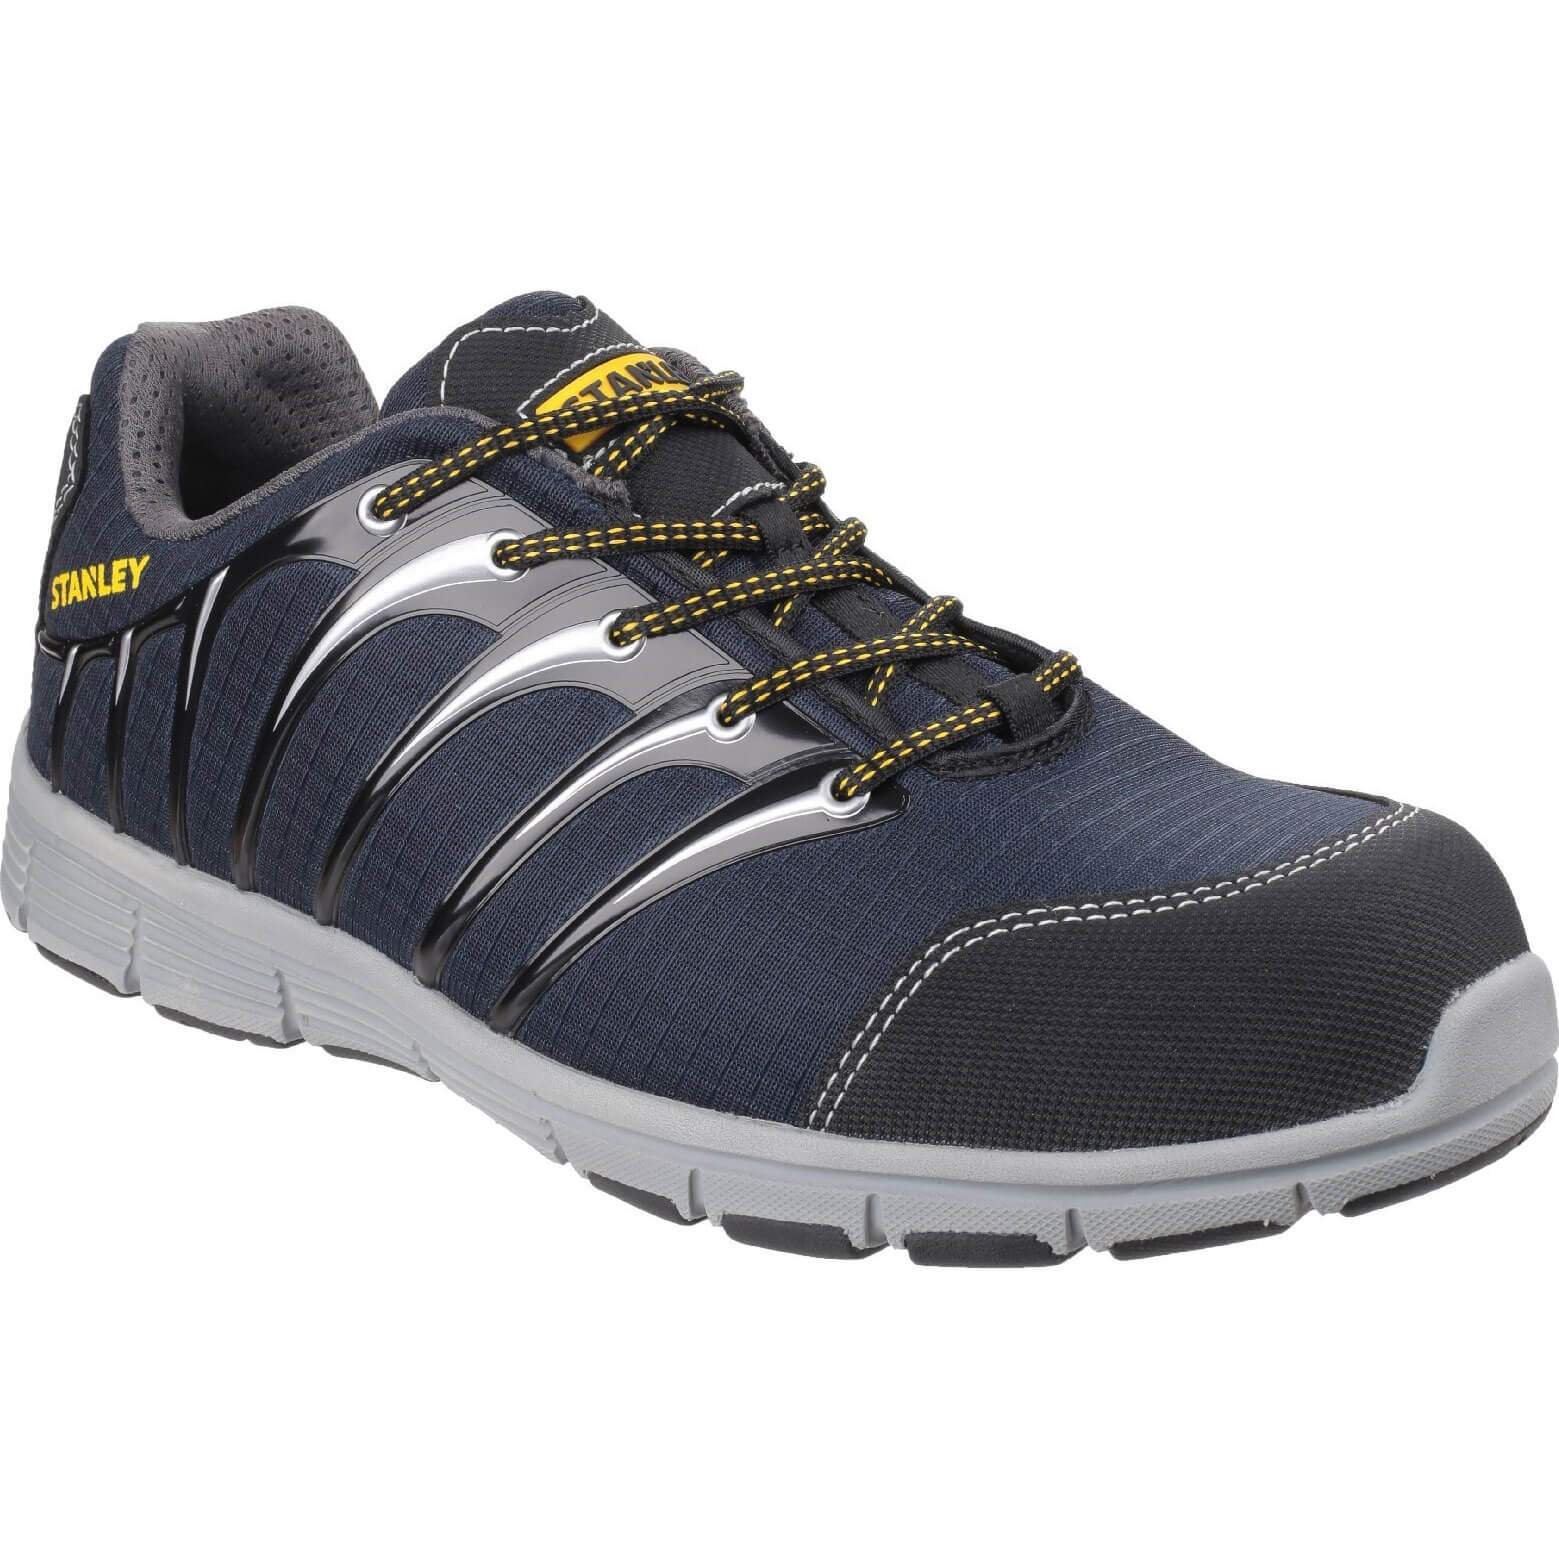 Image of Stanley Globe S1 P Sports Safety Trainer Navy / Grey Size 7